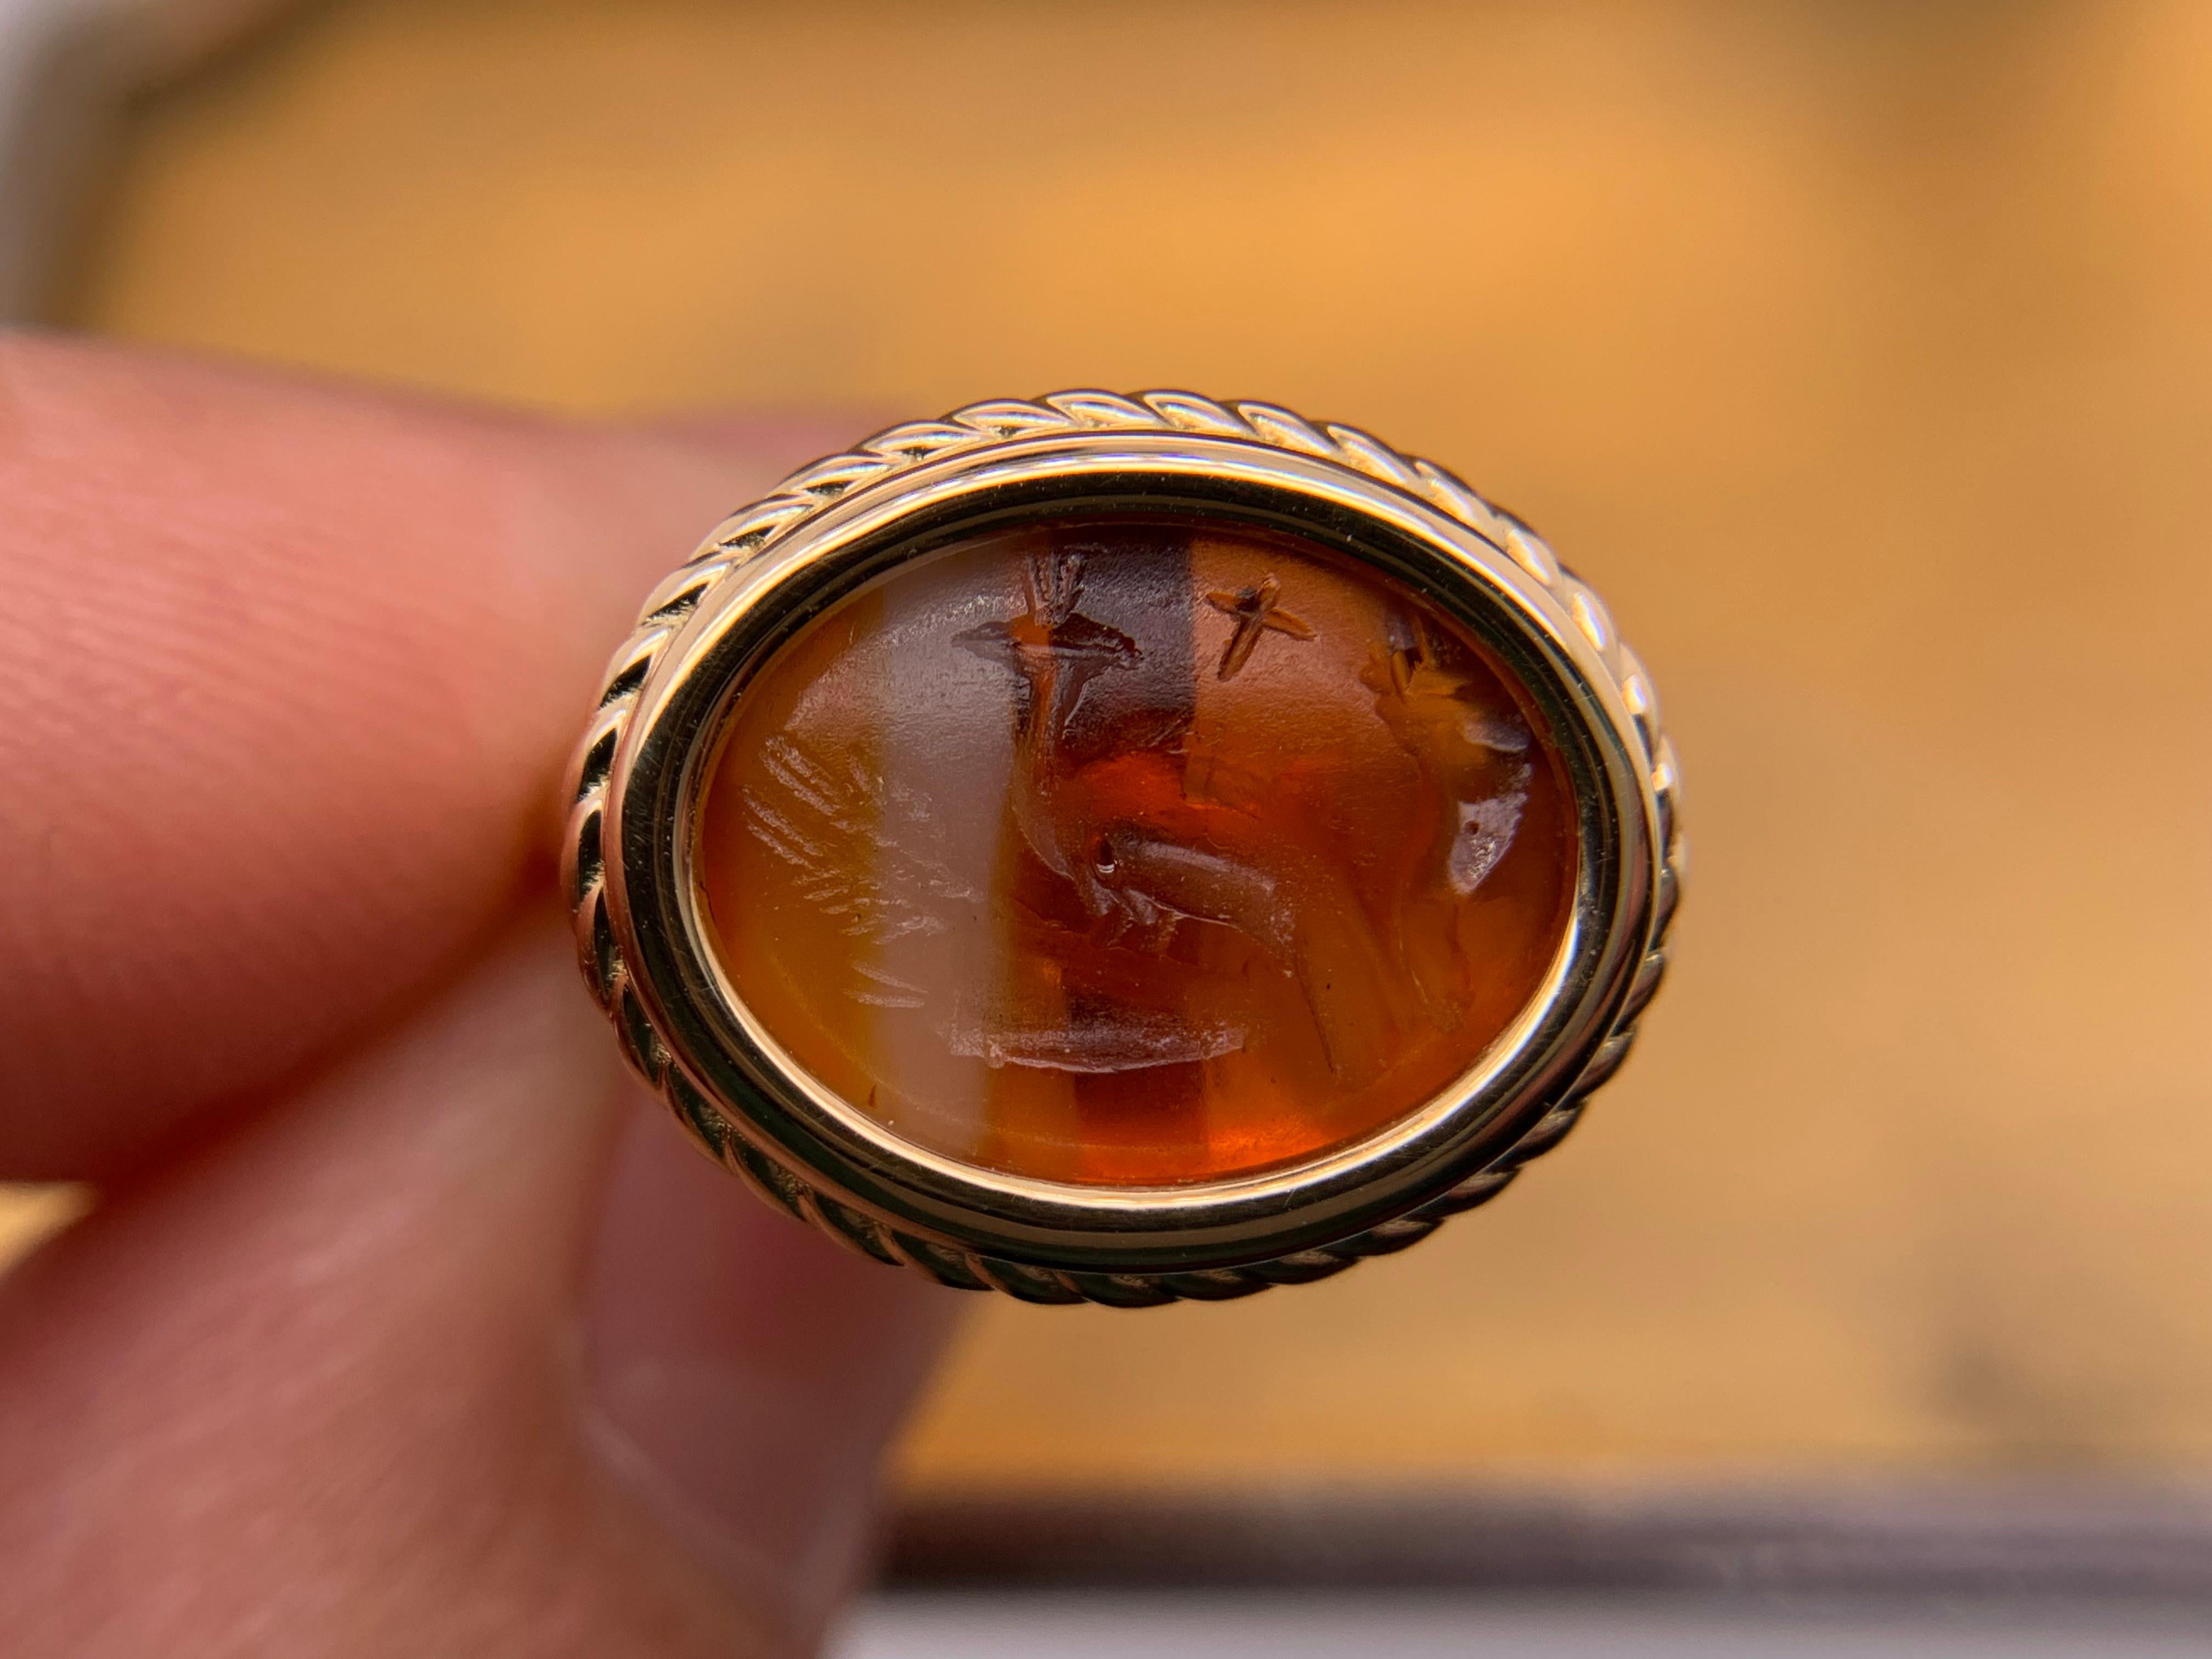 A lovely Ancient Roman gem. The orange and white banded agate intaglio is over 2000 years old. In tondo (carved on the horizontal), we find a peacock between two cornucopias and above it a cross. 
These three Ancient Roman symbols carved into this